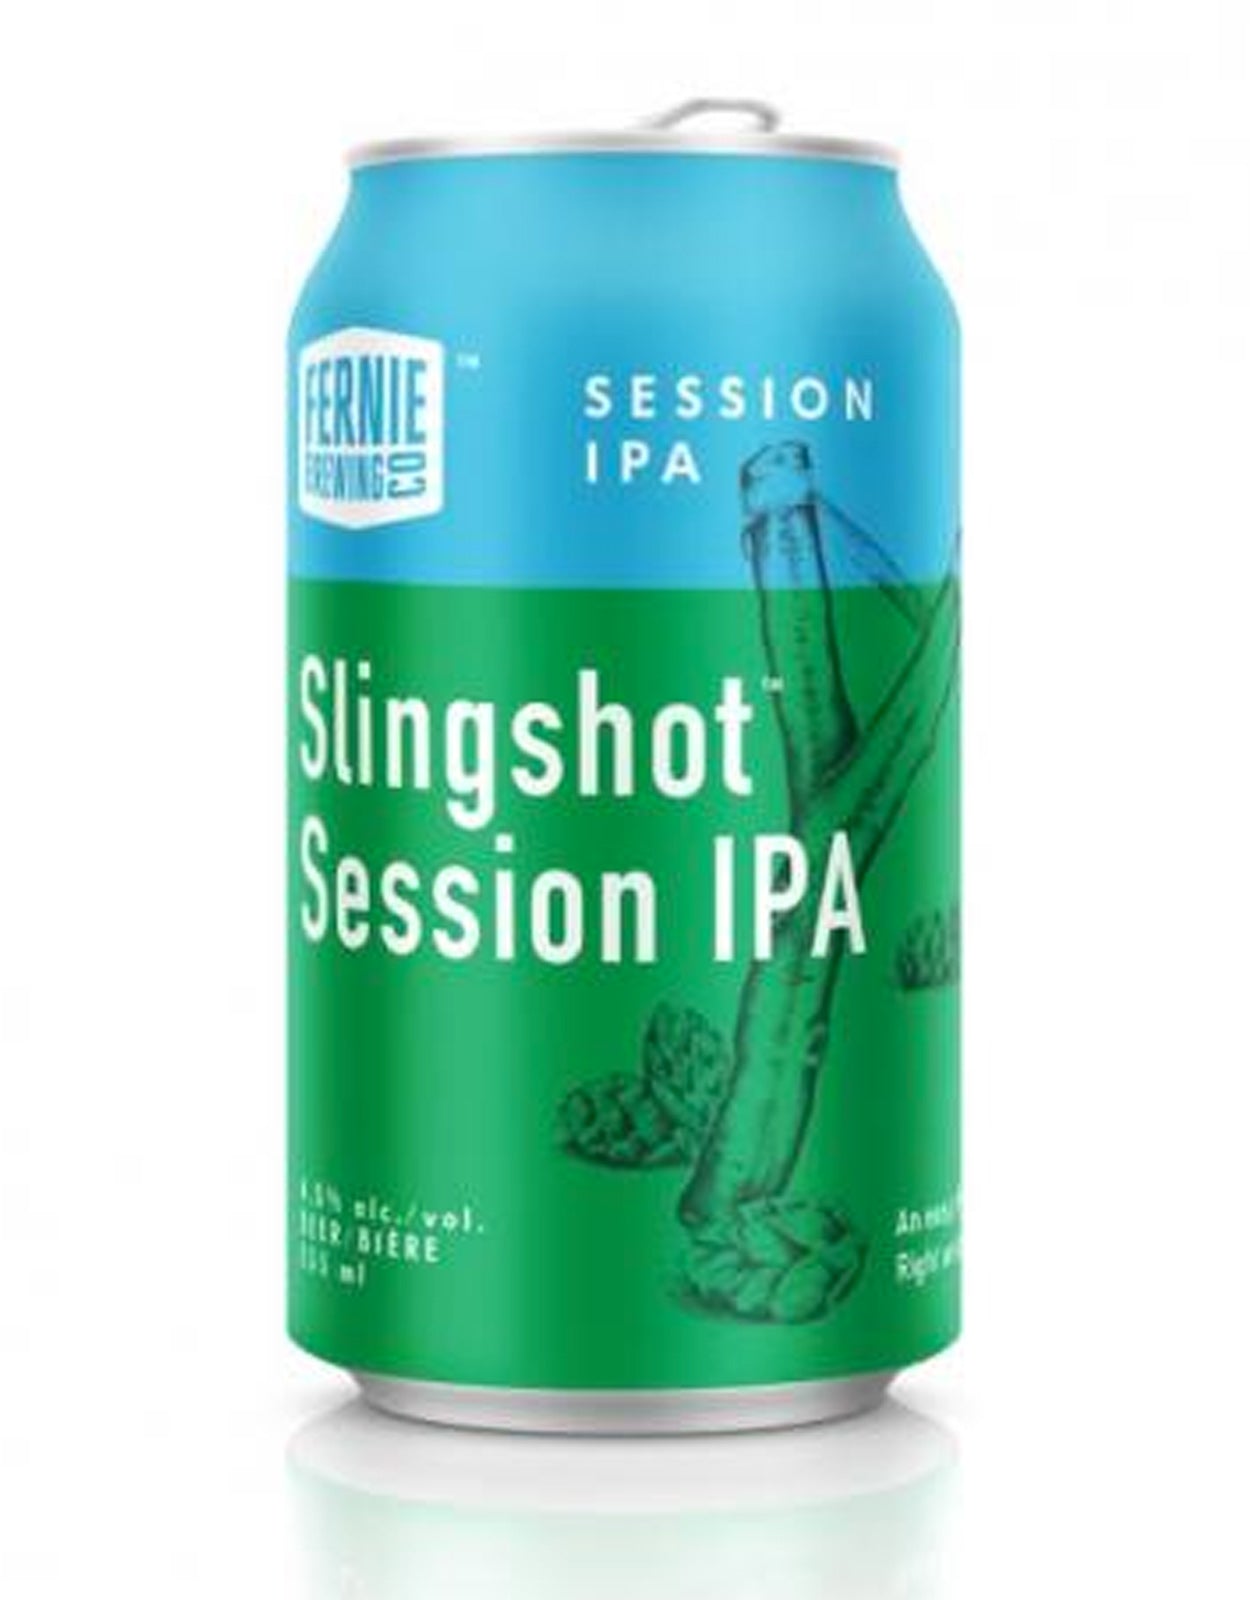 Fernie Brewing Slingshot Session IPA 355 ml - 6 Cans